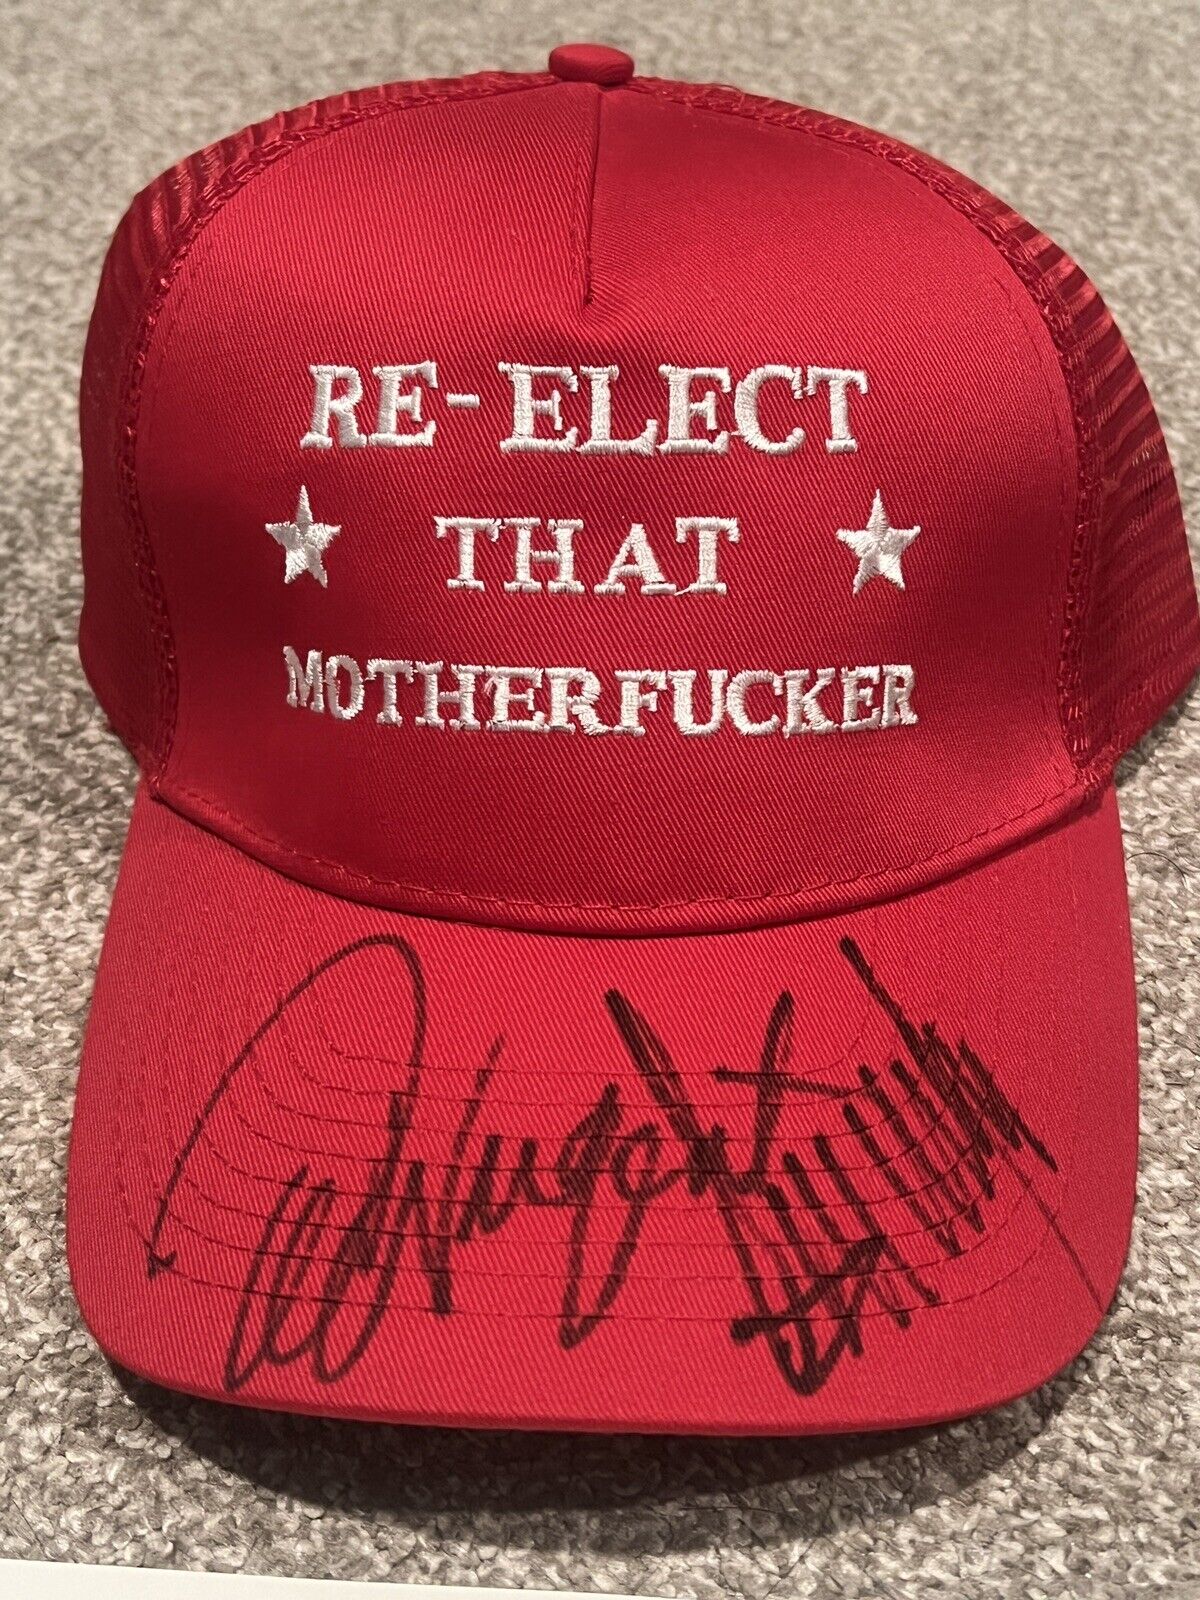 PRESIDENT DONALD TRUMP TED NUGENT SIGNED RE-ELECT THAT MOTHER HAT AUTO JSA COA